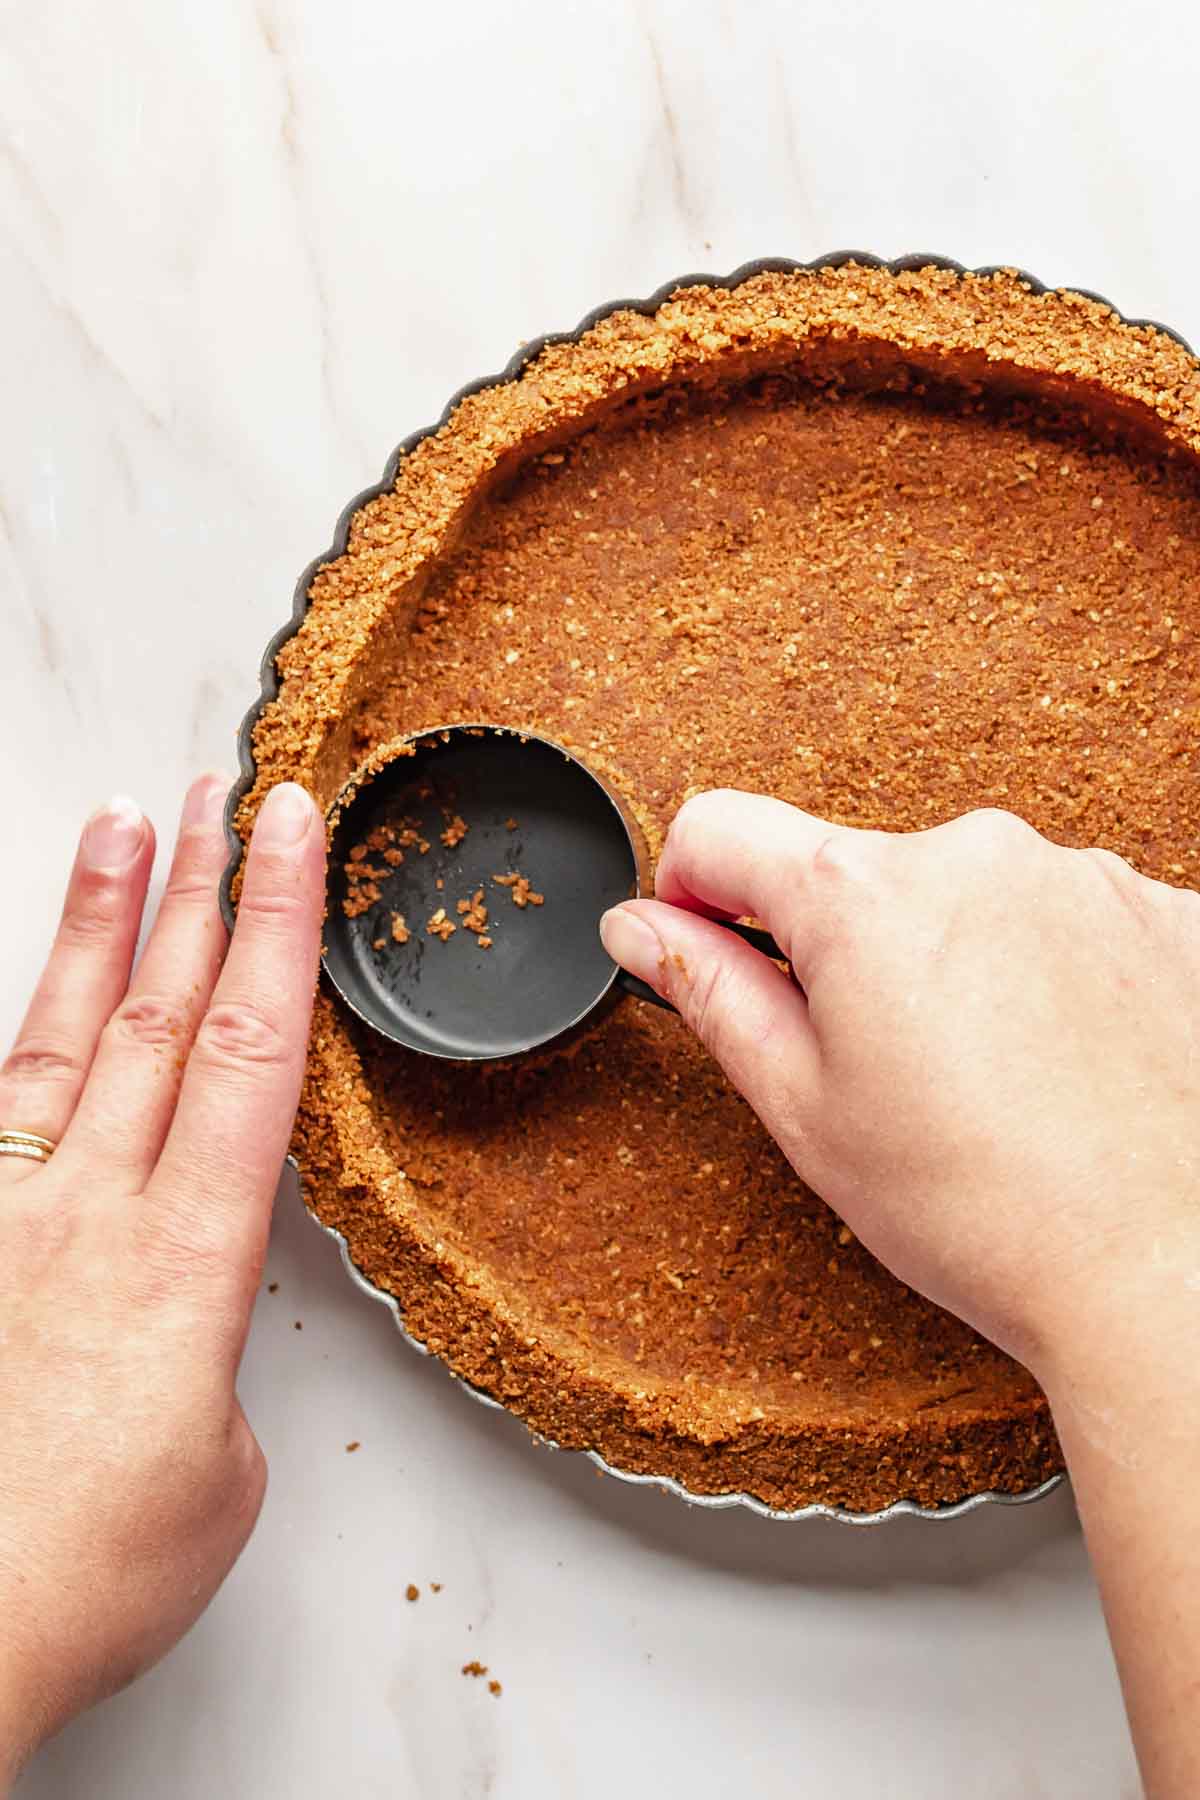 Hands use a measuring cup to press cookie crumbs into a tart pan.